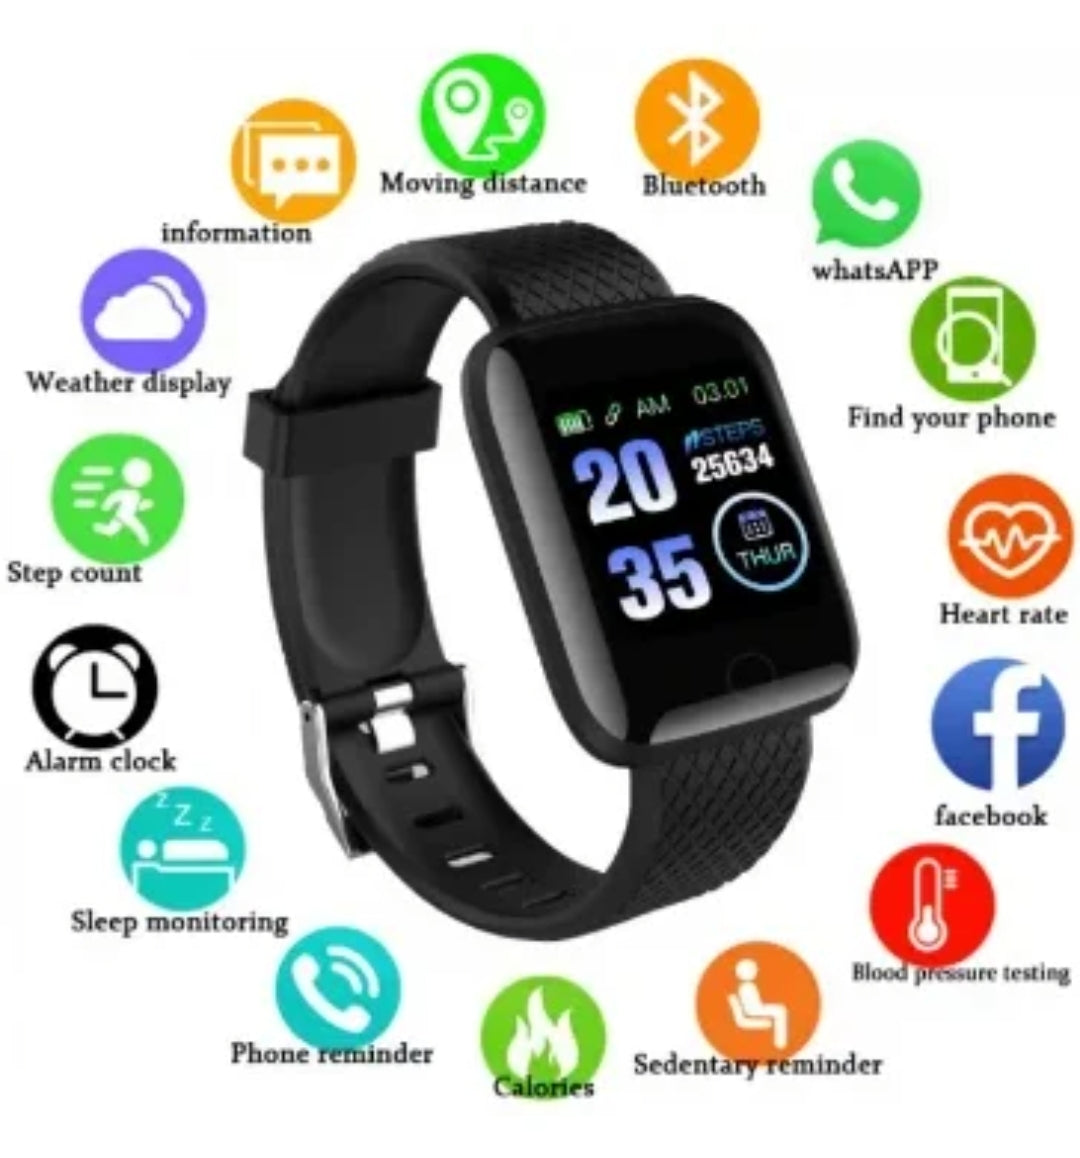 NIB *Smart Bracelet / Color Display with Touch Key